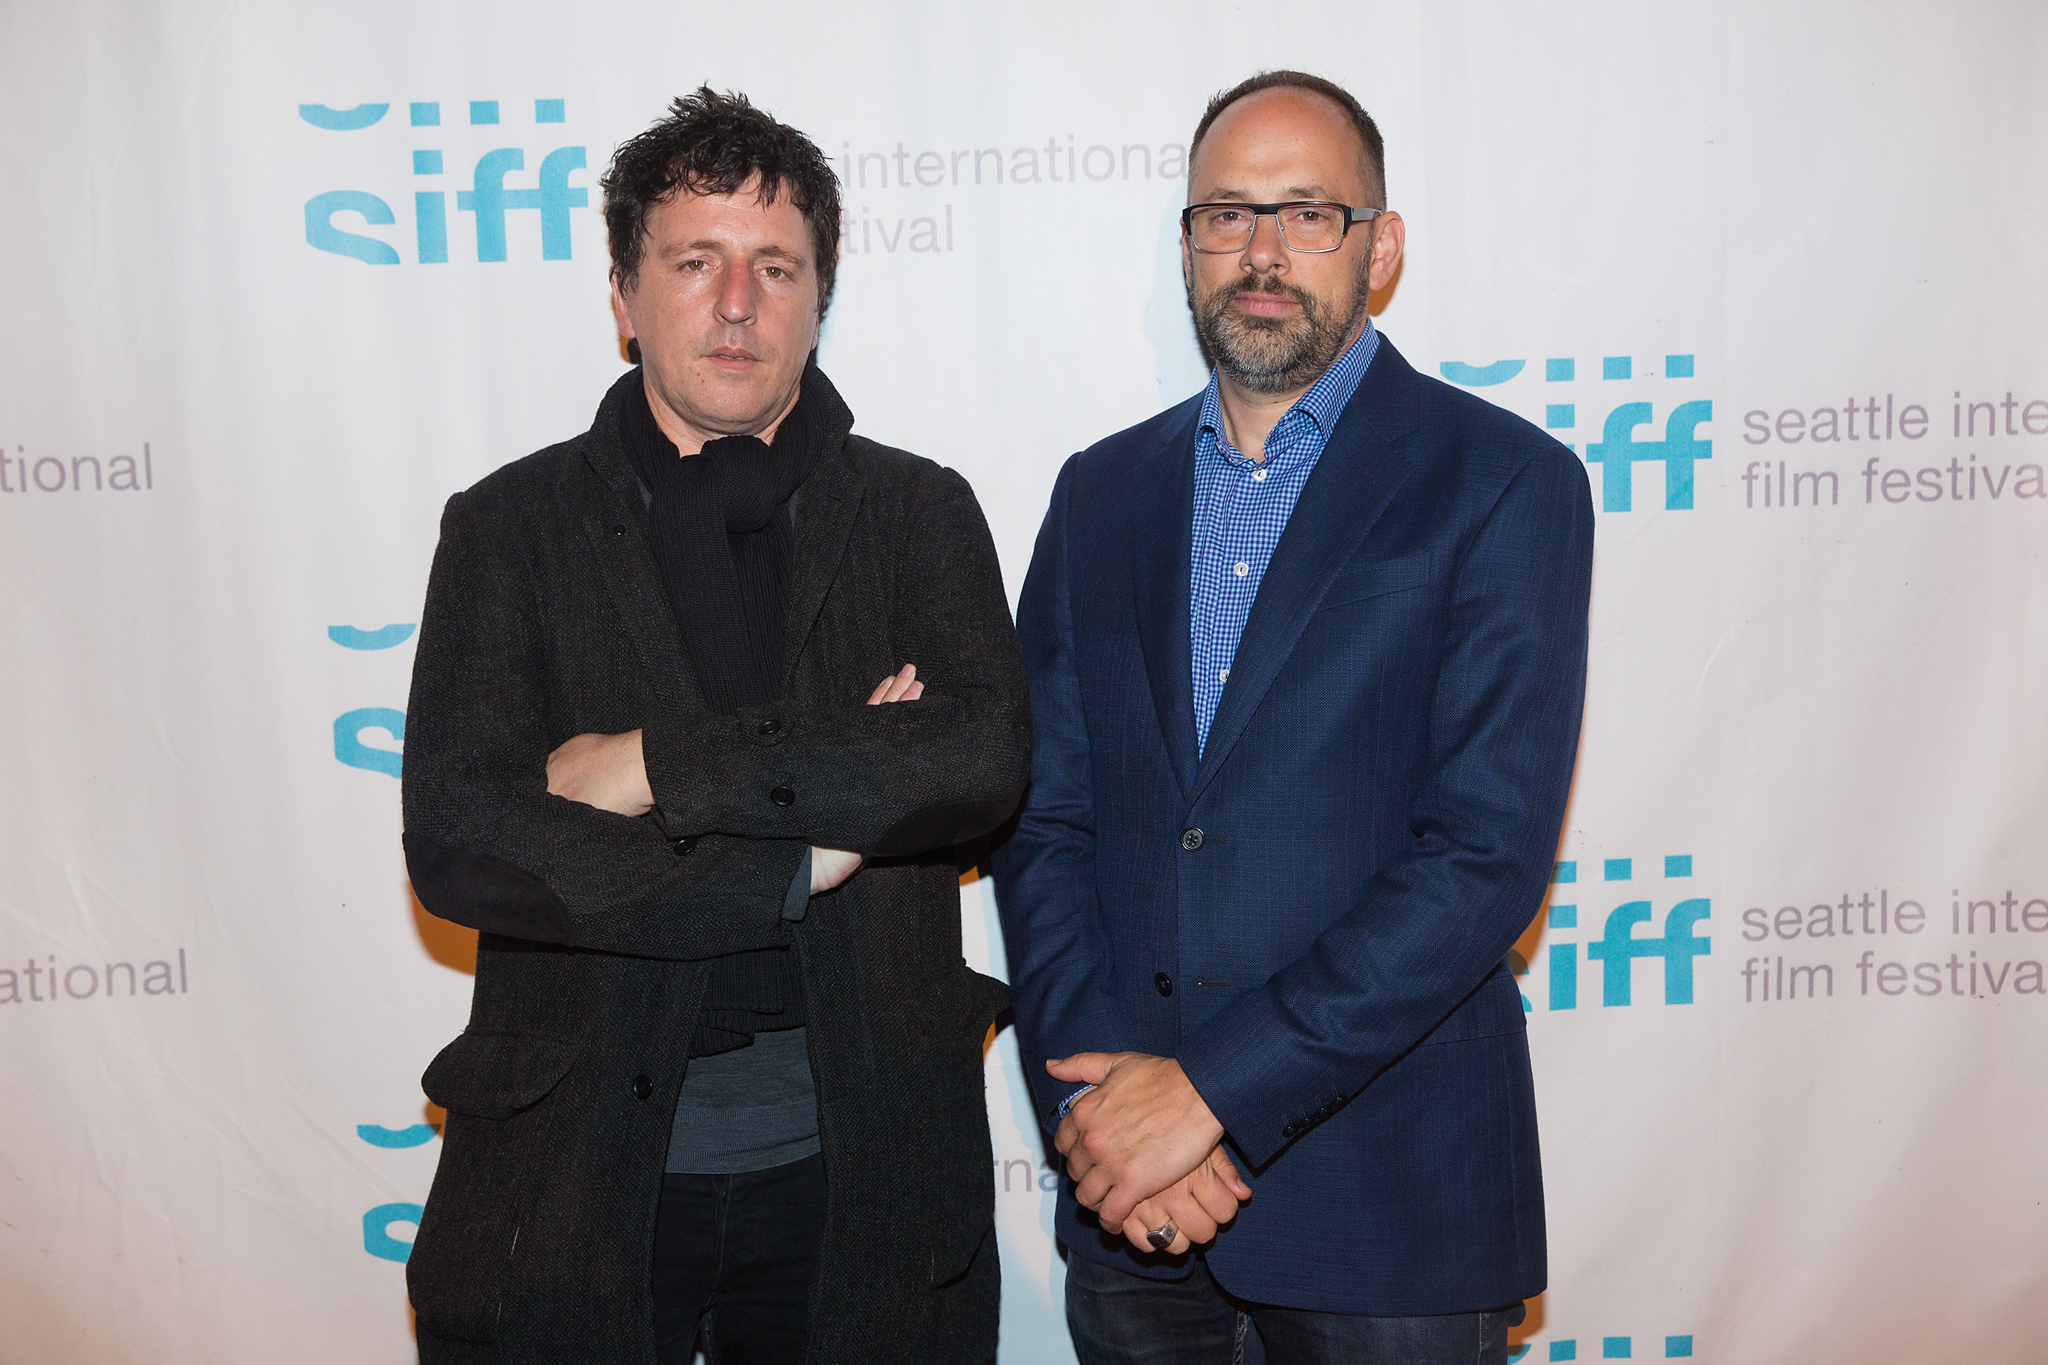 Atticus Ross and Carl Spence